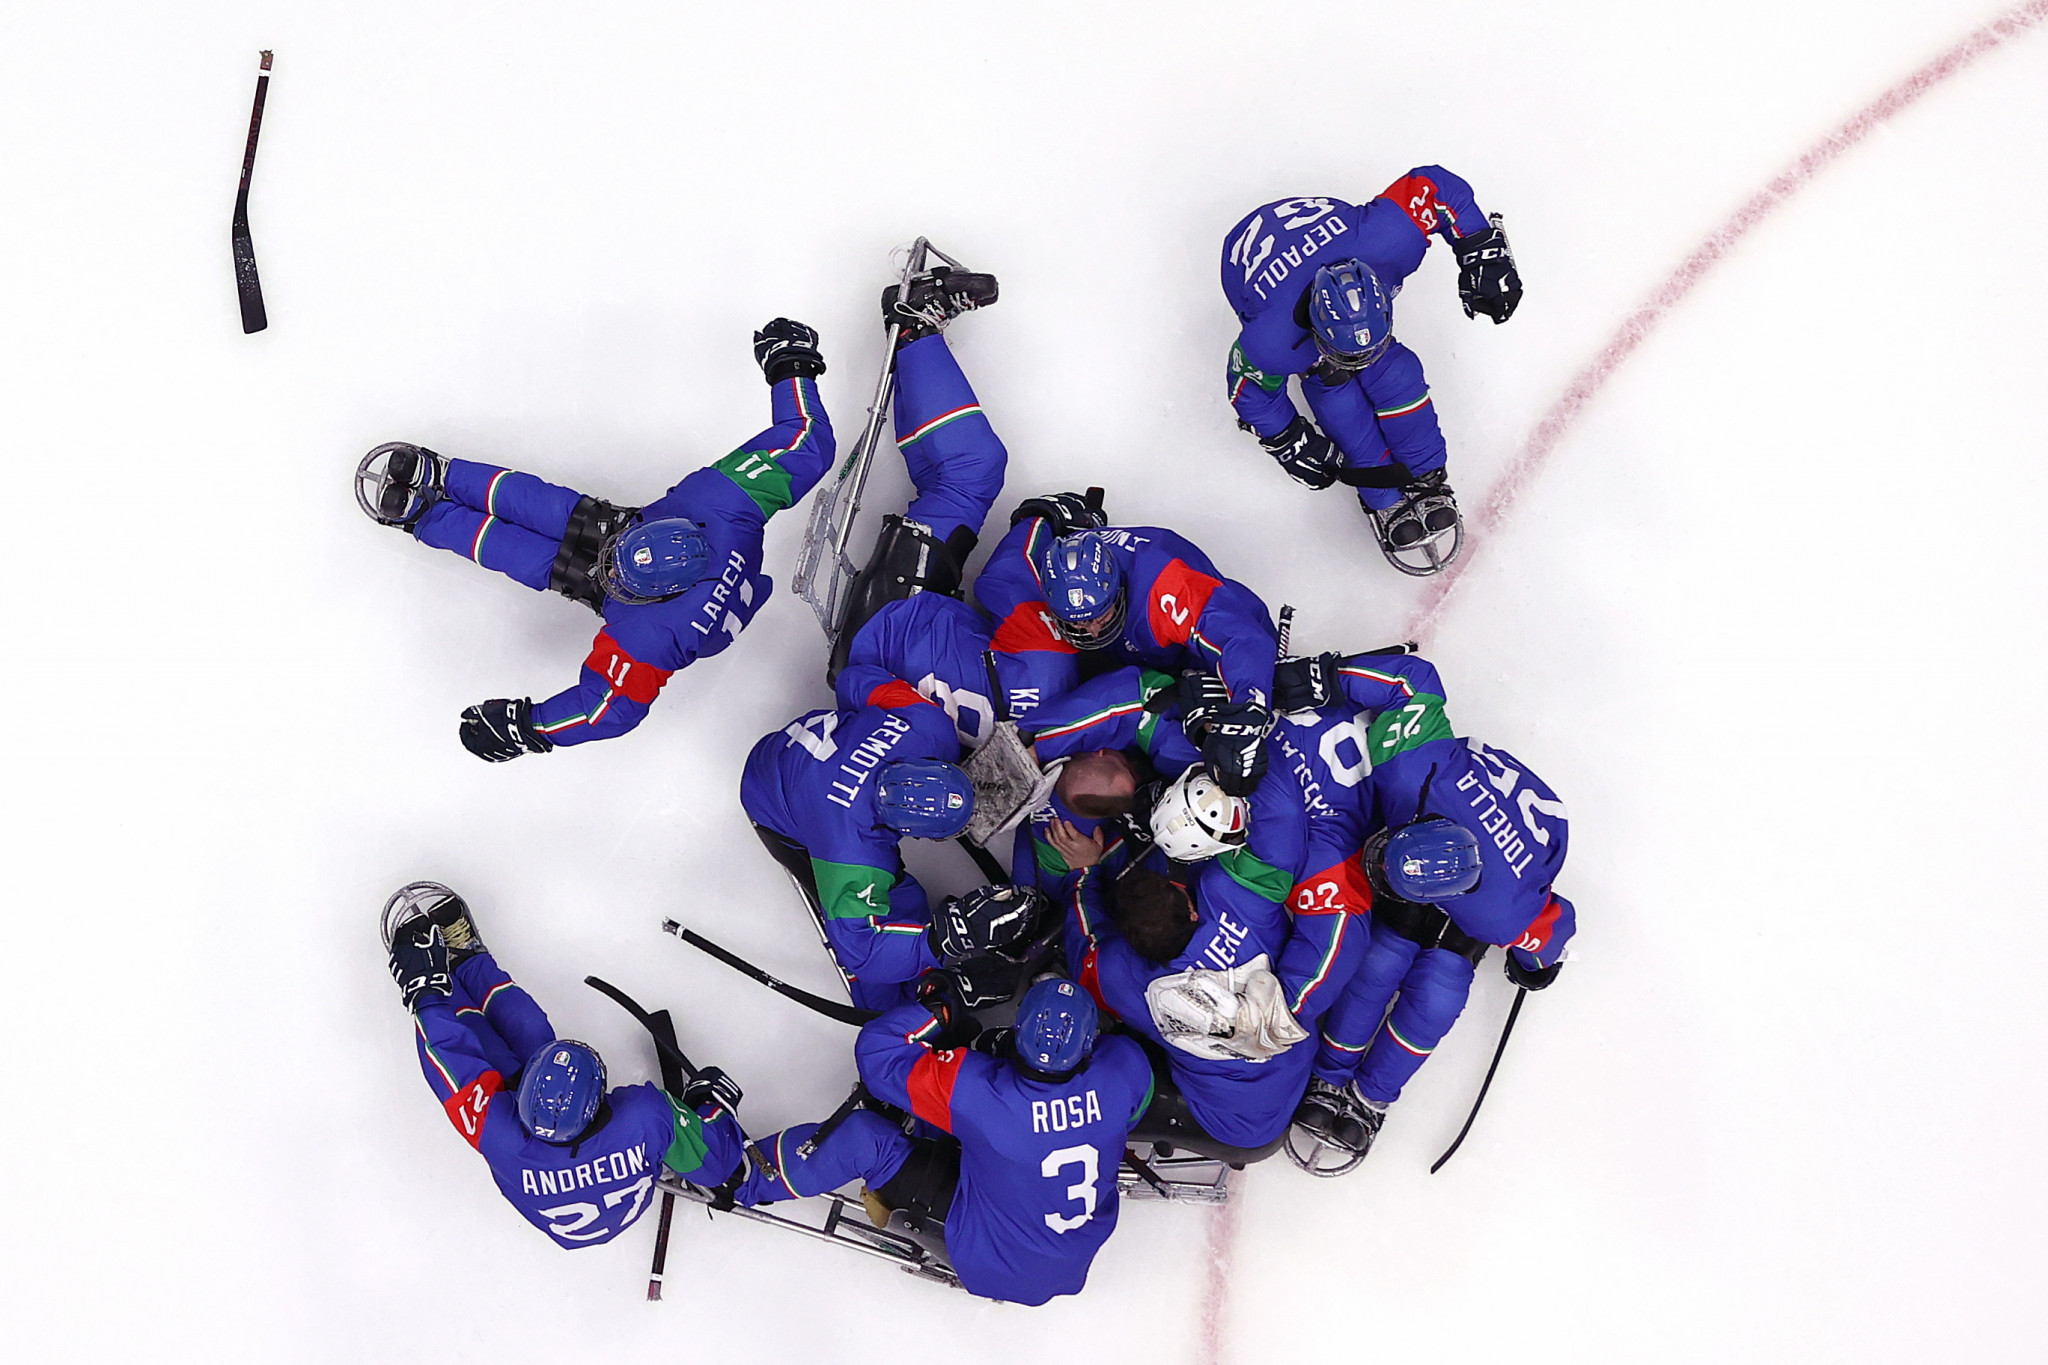 Italy defeated Slovakia 3-2 in a penalty-shot shootout to win 2-1 overall ©Getty Images